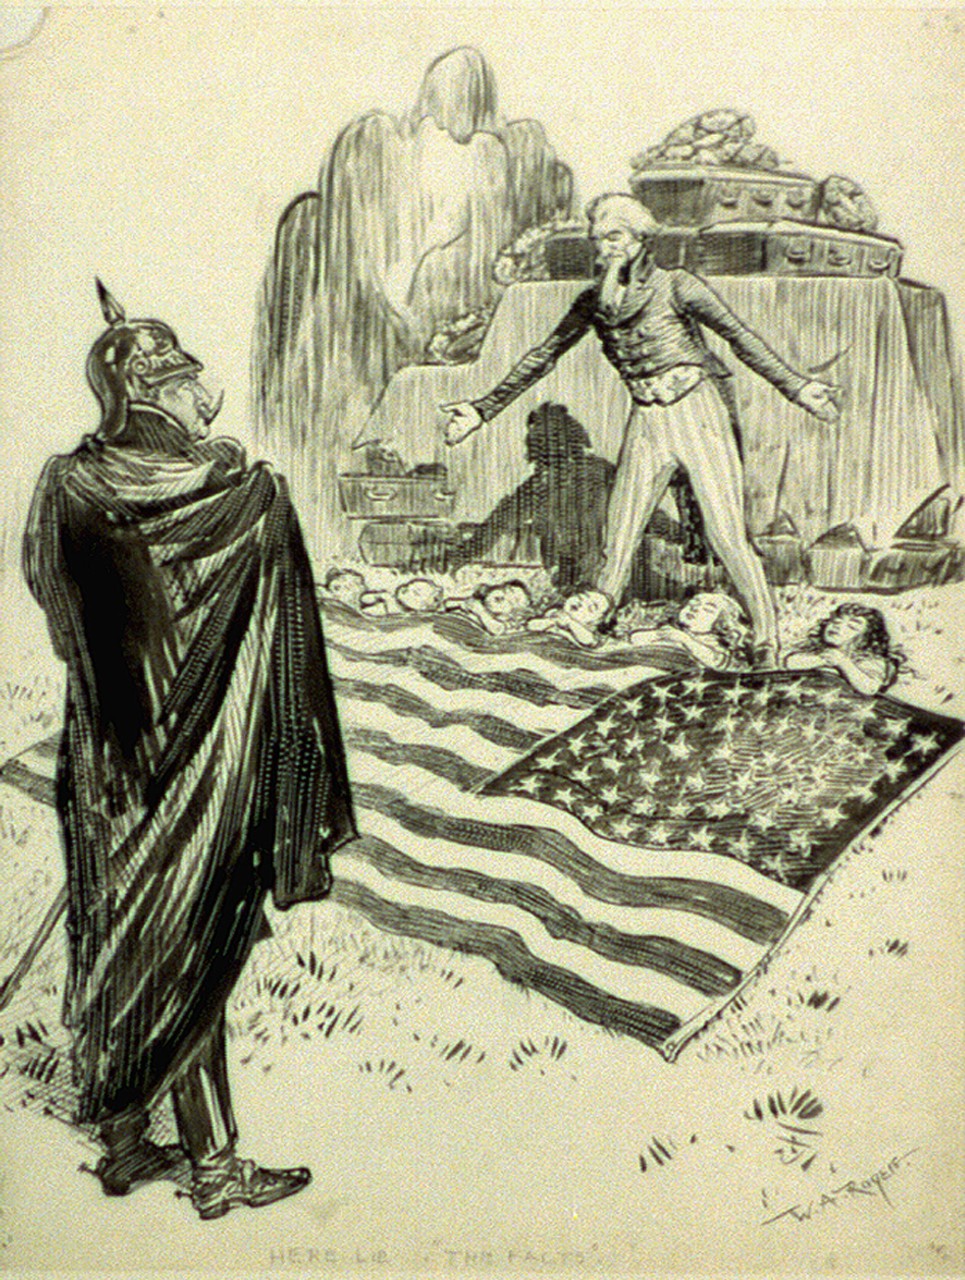 Uncle Sam faces Kaiser Wilhelm II, while standing behind the flag-covered bodies of the U.S. children killed in the Lusitania sinking.